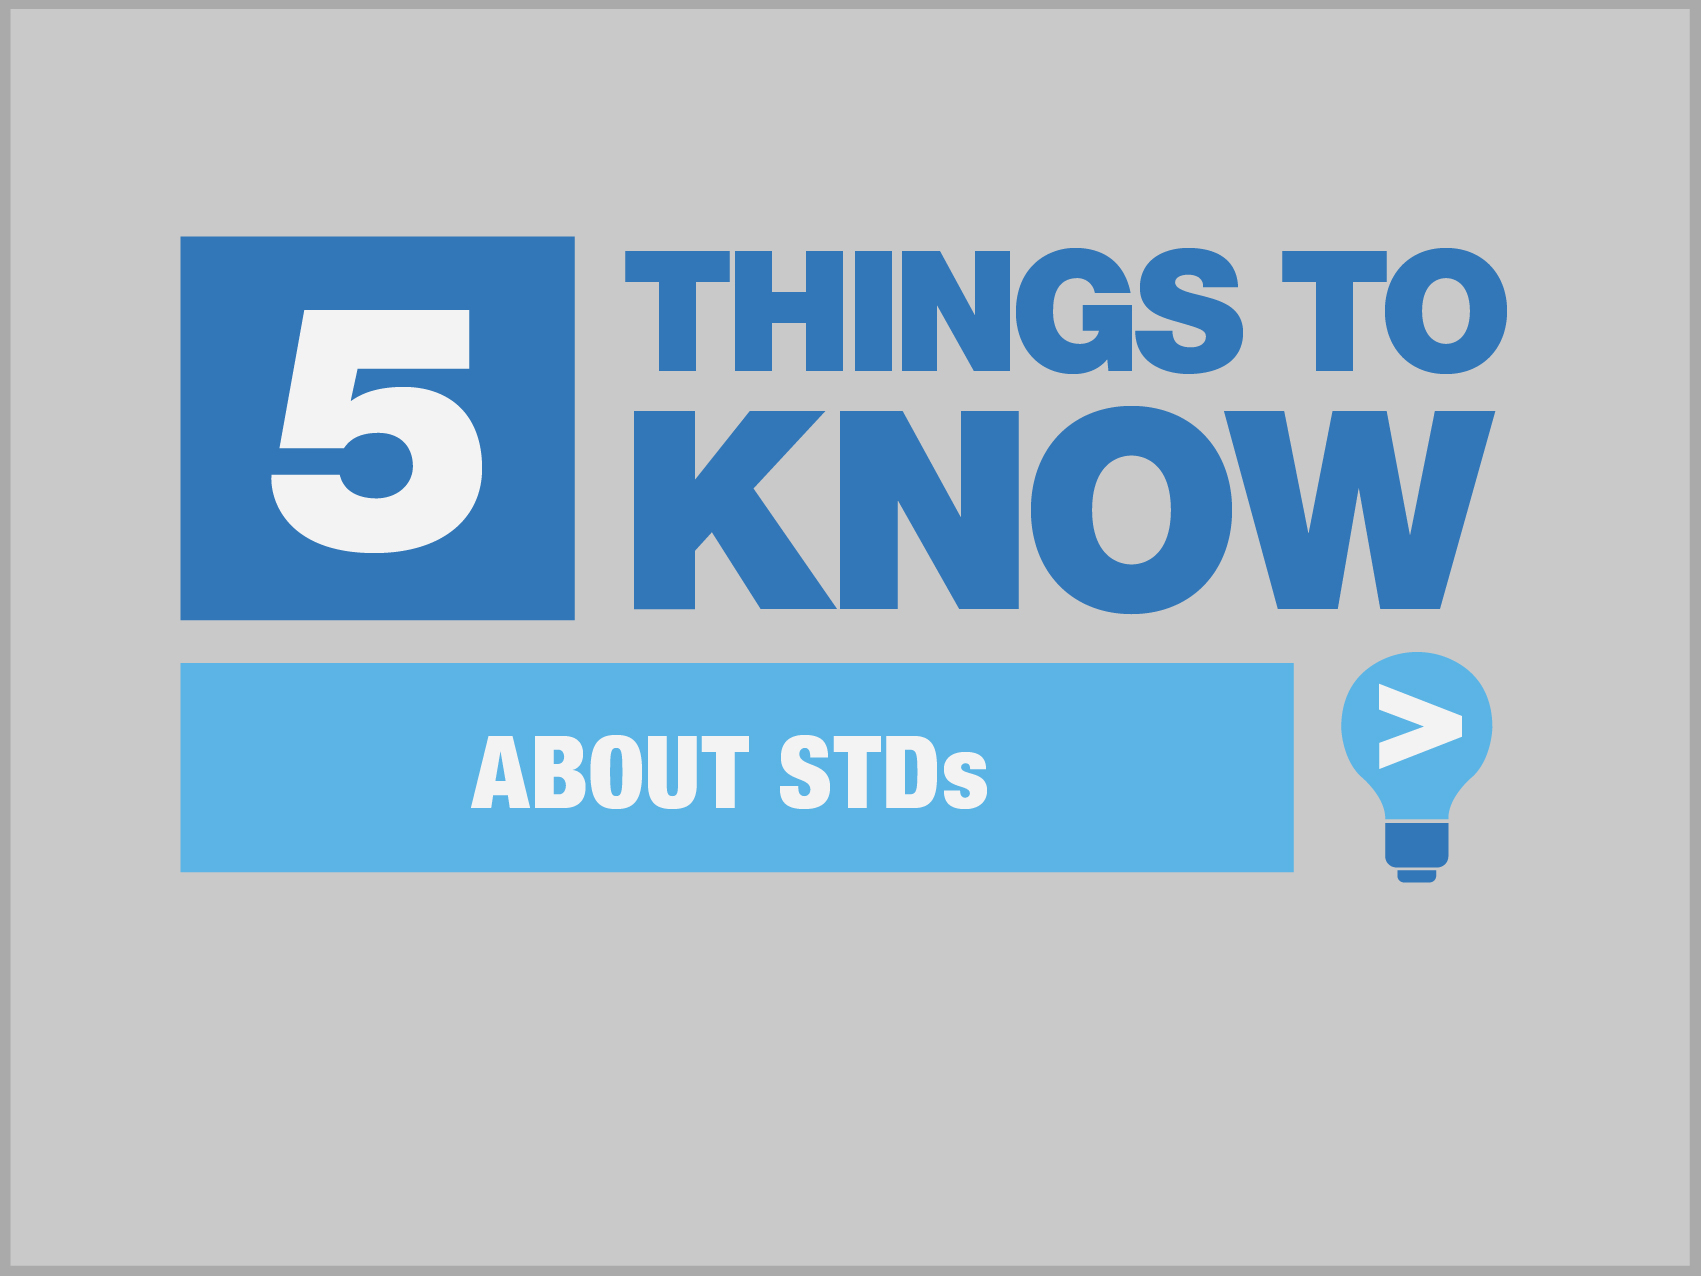 5 Things to Know About STDs